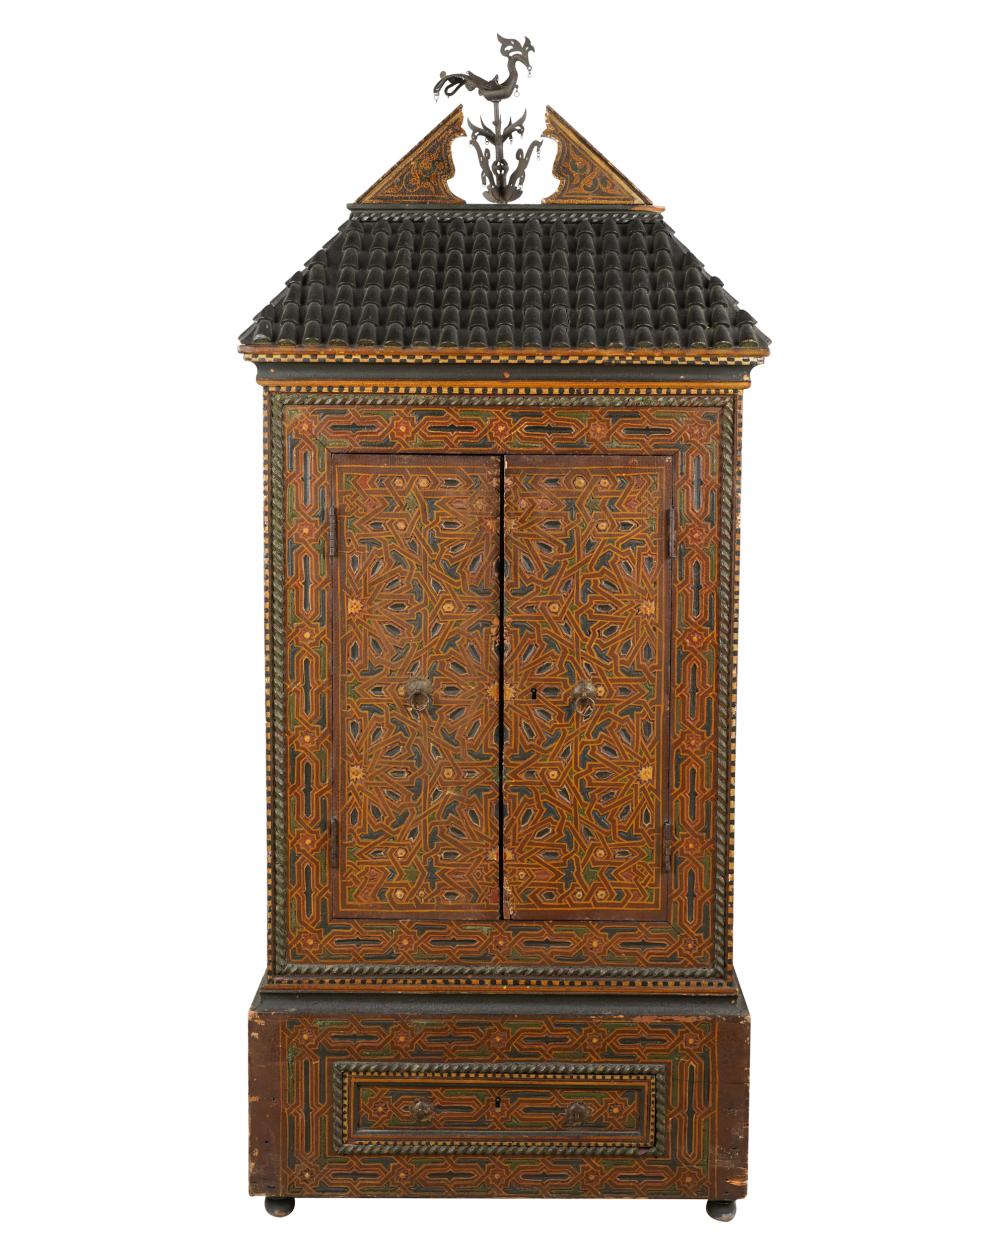 ASIAN POLYCHROME-PAINTED WOOD CABINETthe